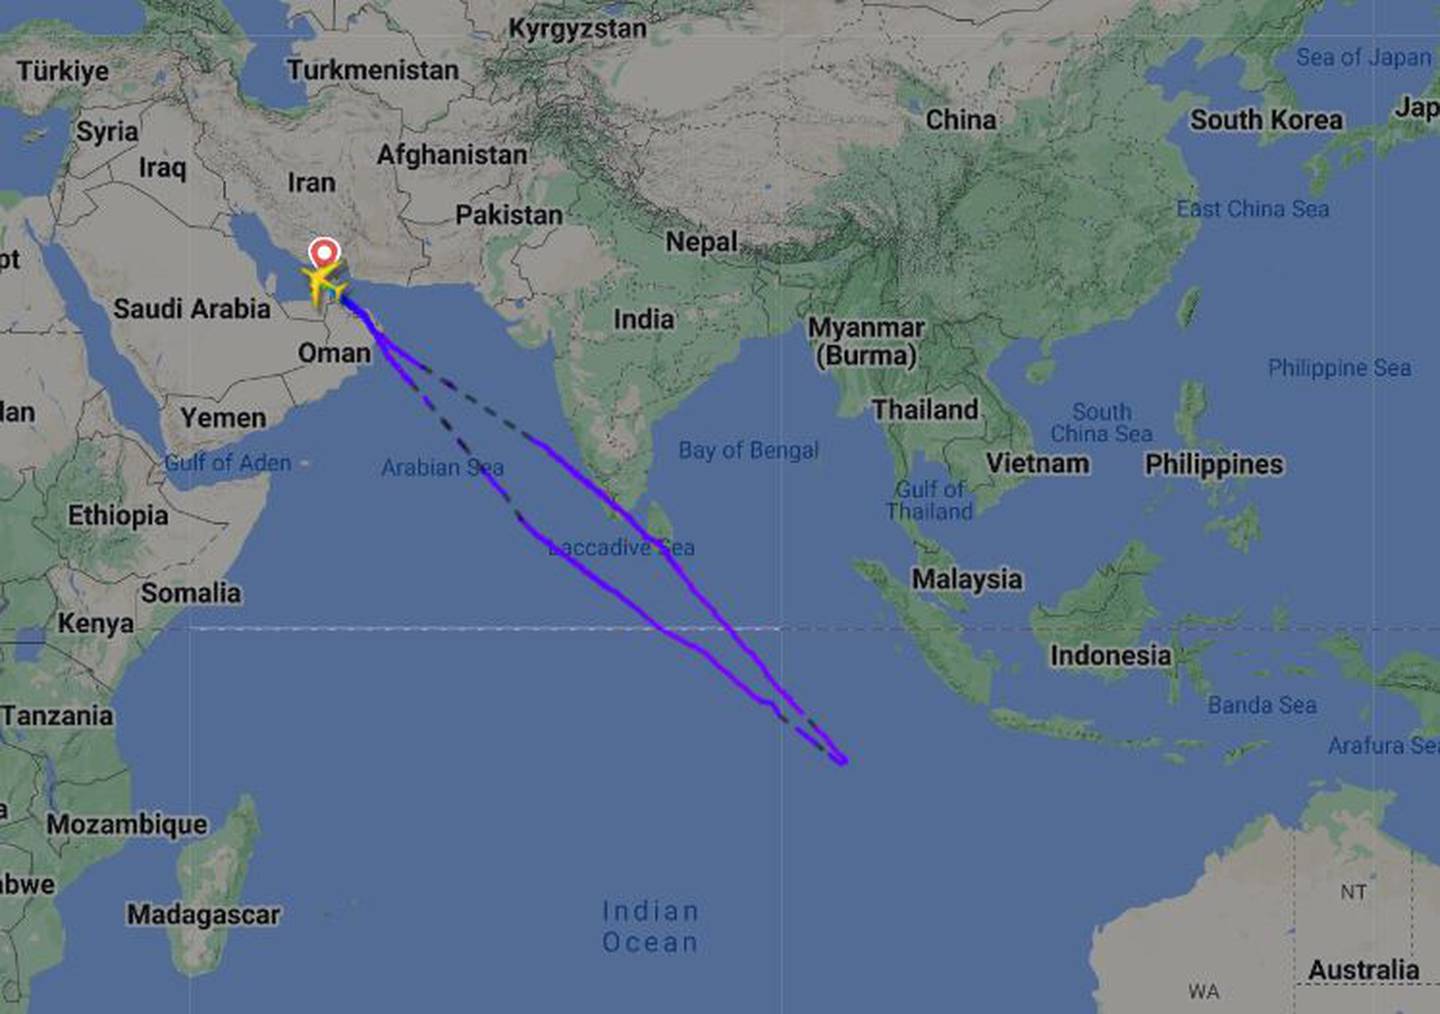 Emirates' longest commercial flight turned back to Dubai after seven hours in the air. Photo: FlightRadar24.com